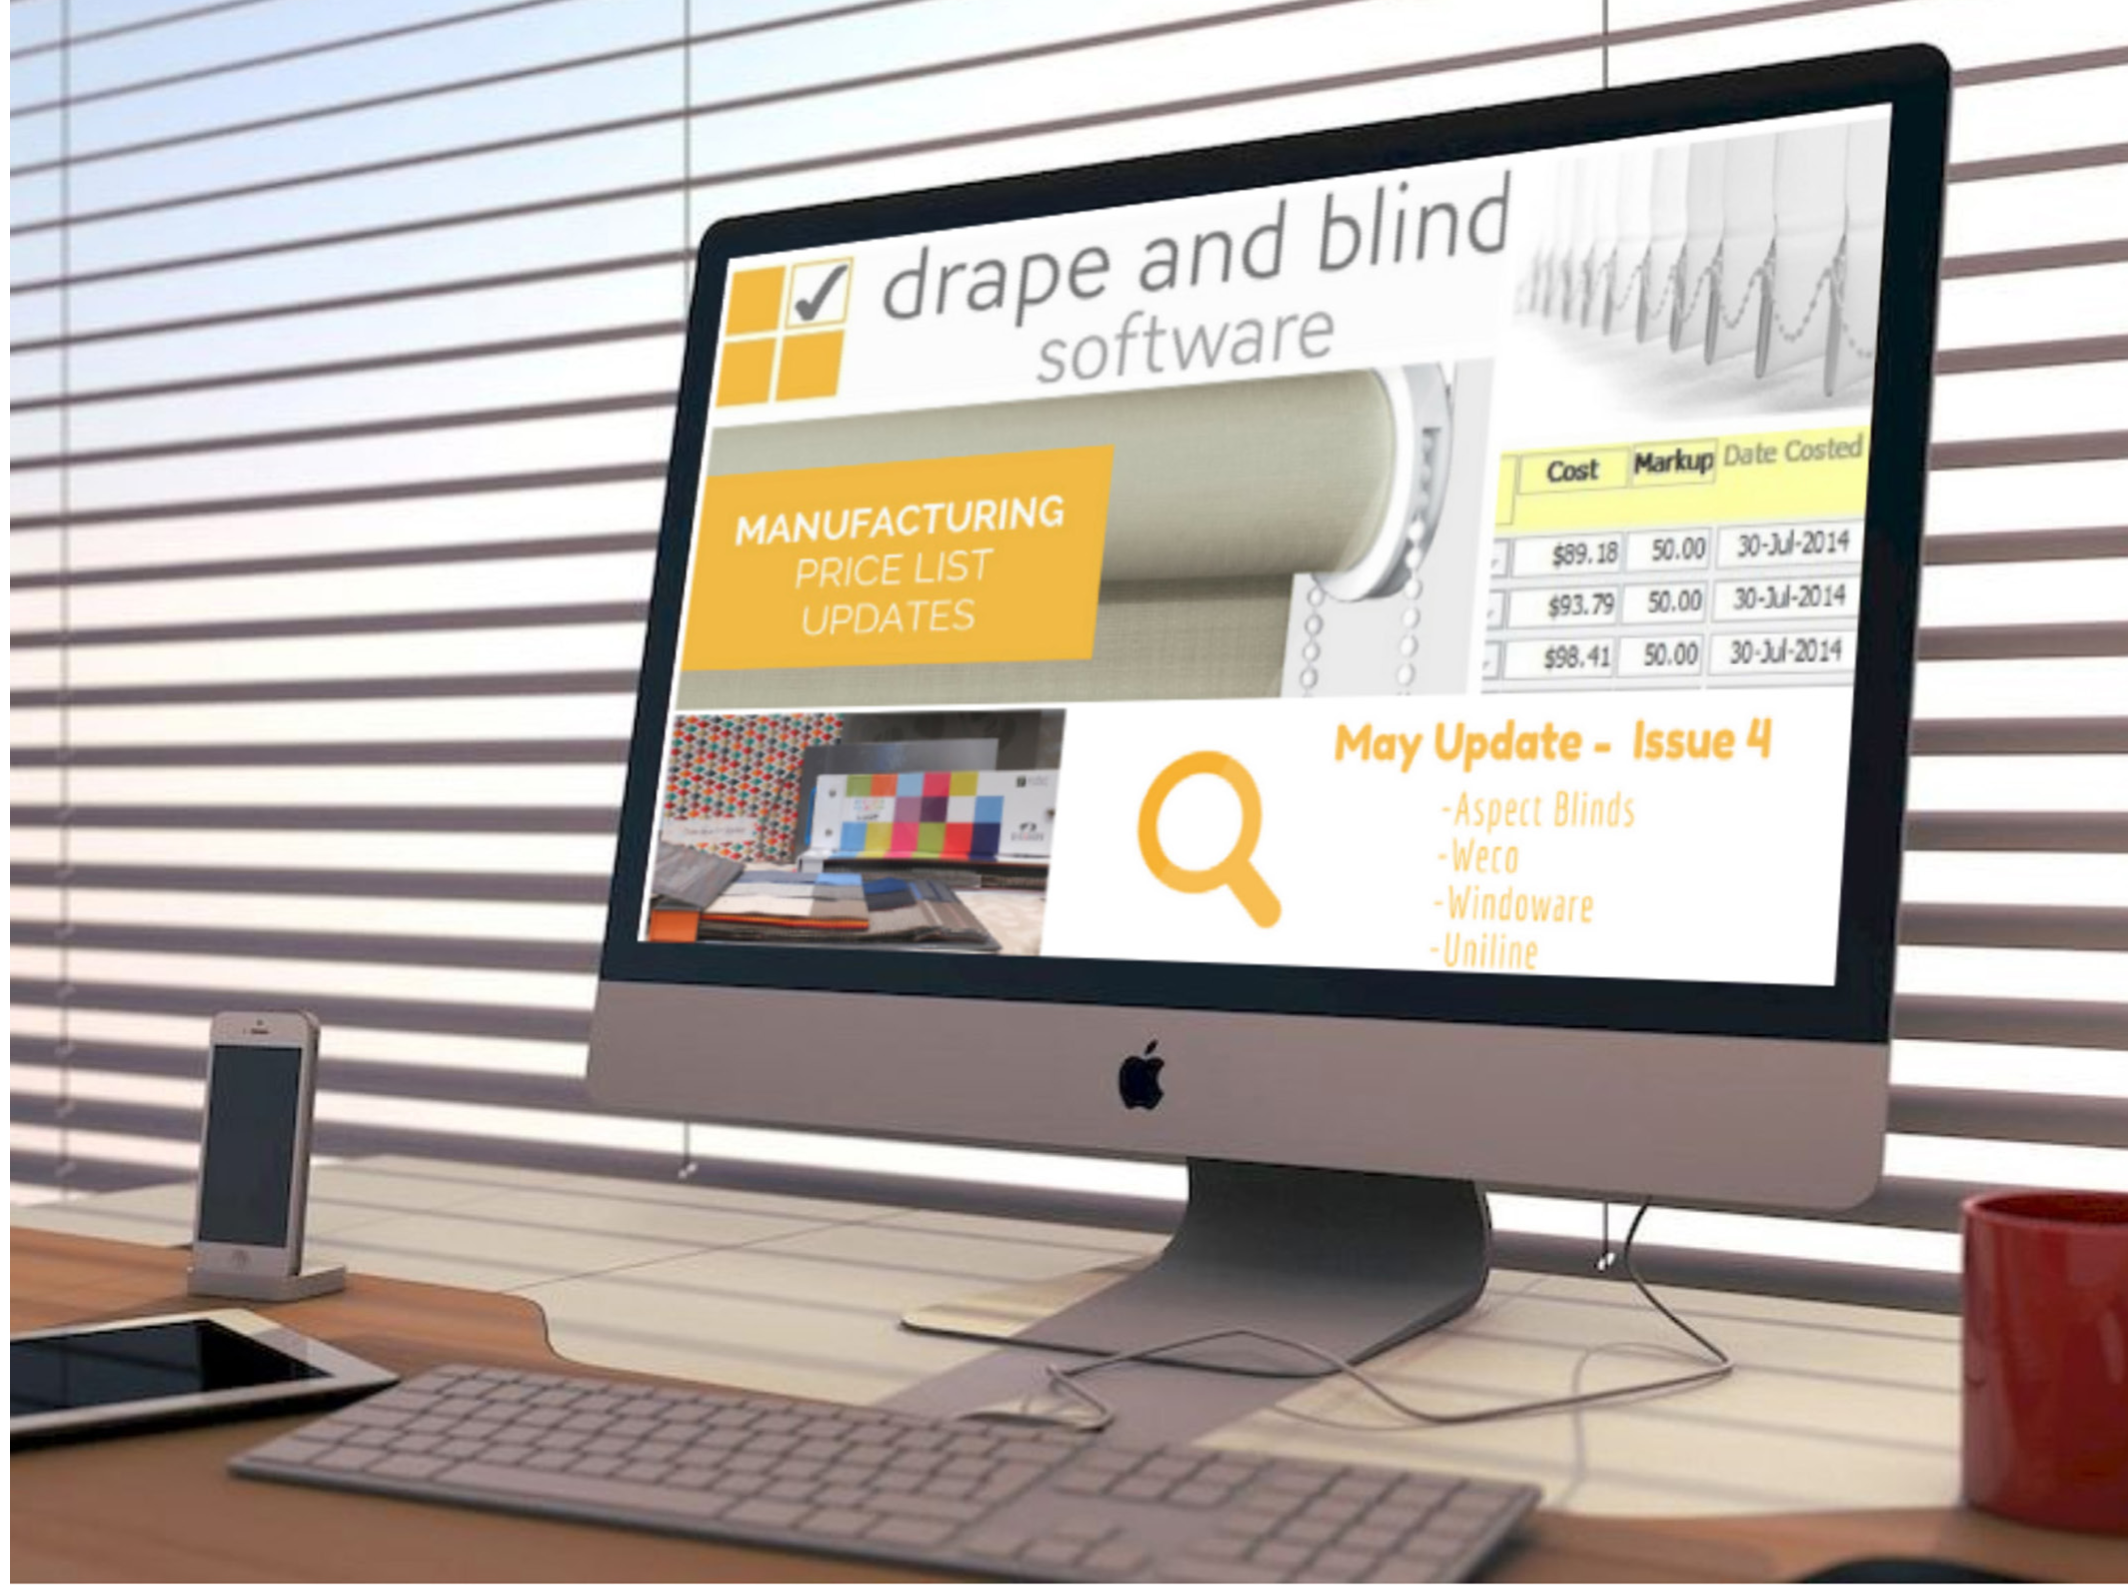 WFA Magazine 2017 Article. Retail software continues to evolve with Drape and Blind Software.